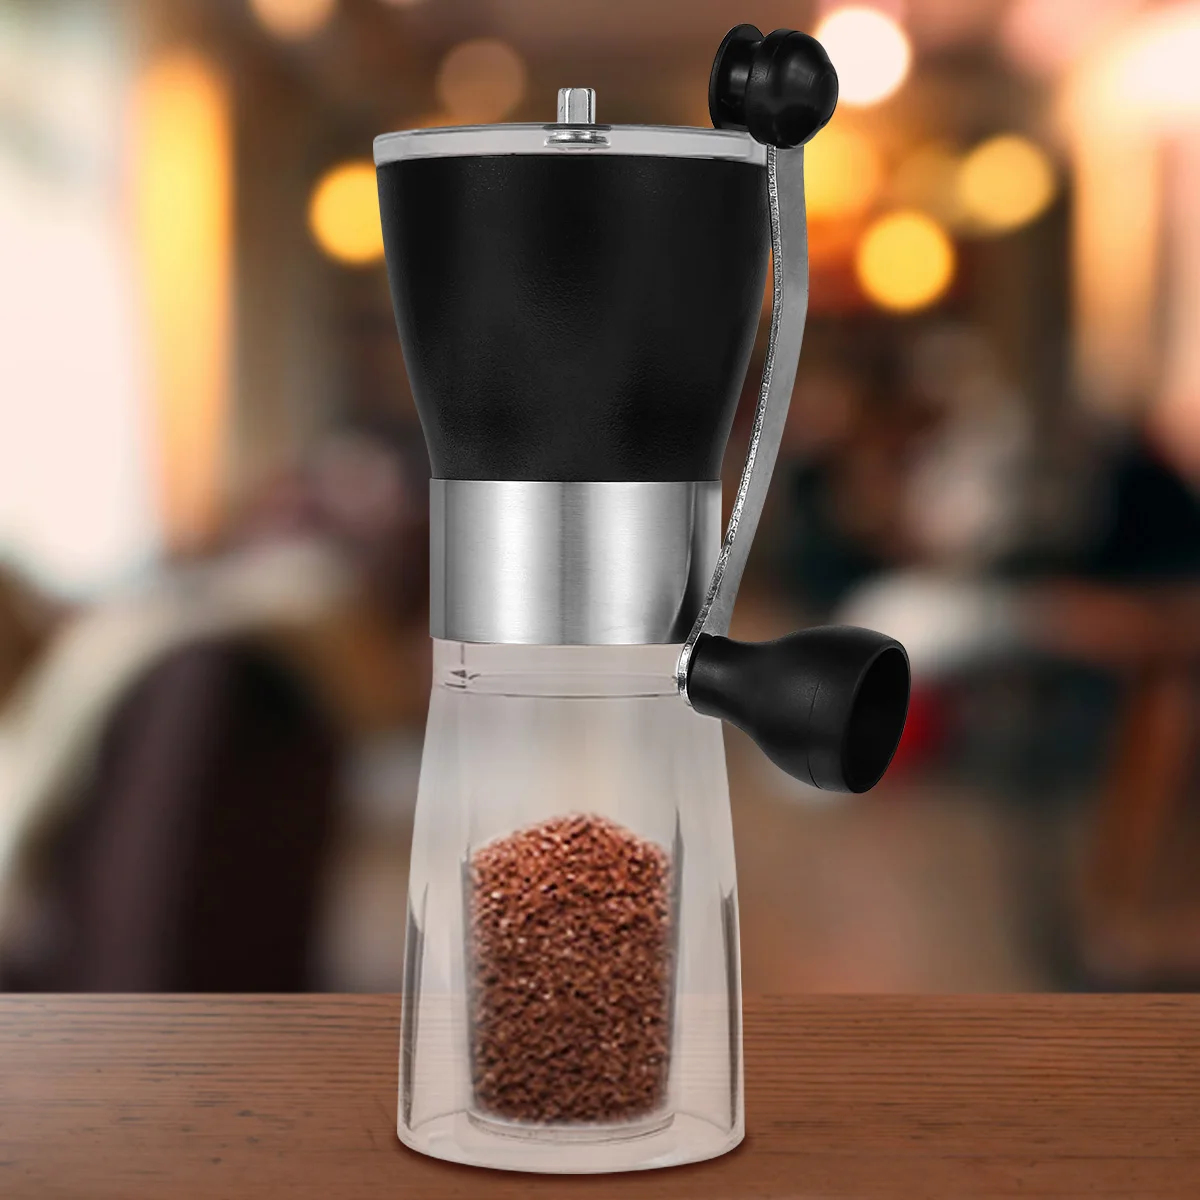 Coffee Grinder Portable Hand Manual Stainless Steel Coffee Bean Grinder with Ceramic Coffee Mill Grinding Tools For Home Kitchen beijamei manual coffee grinder home hand conical burr mill stainless steel premium ceramic burr coffee grinding